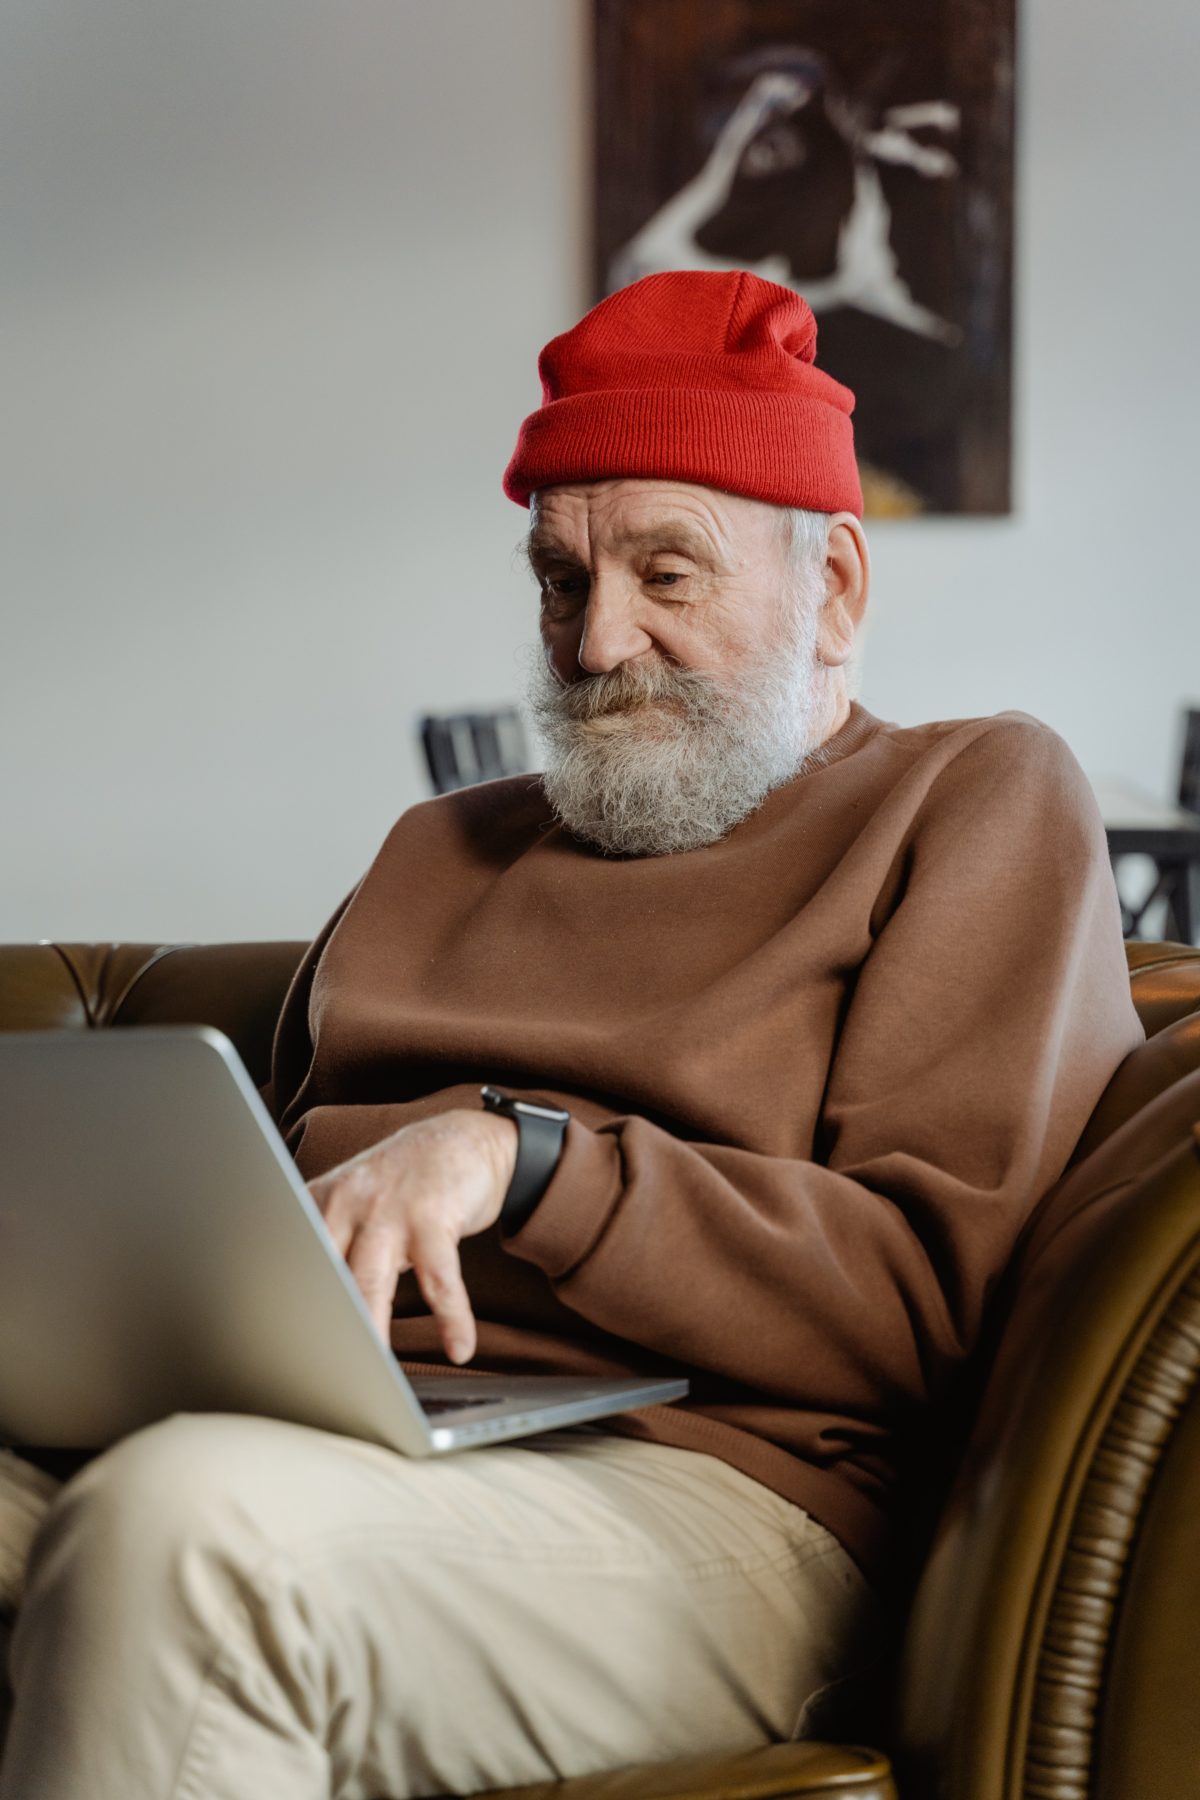 Older man with white beard wearing a red hat using his computer.